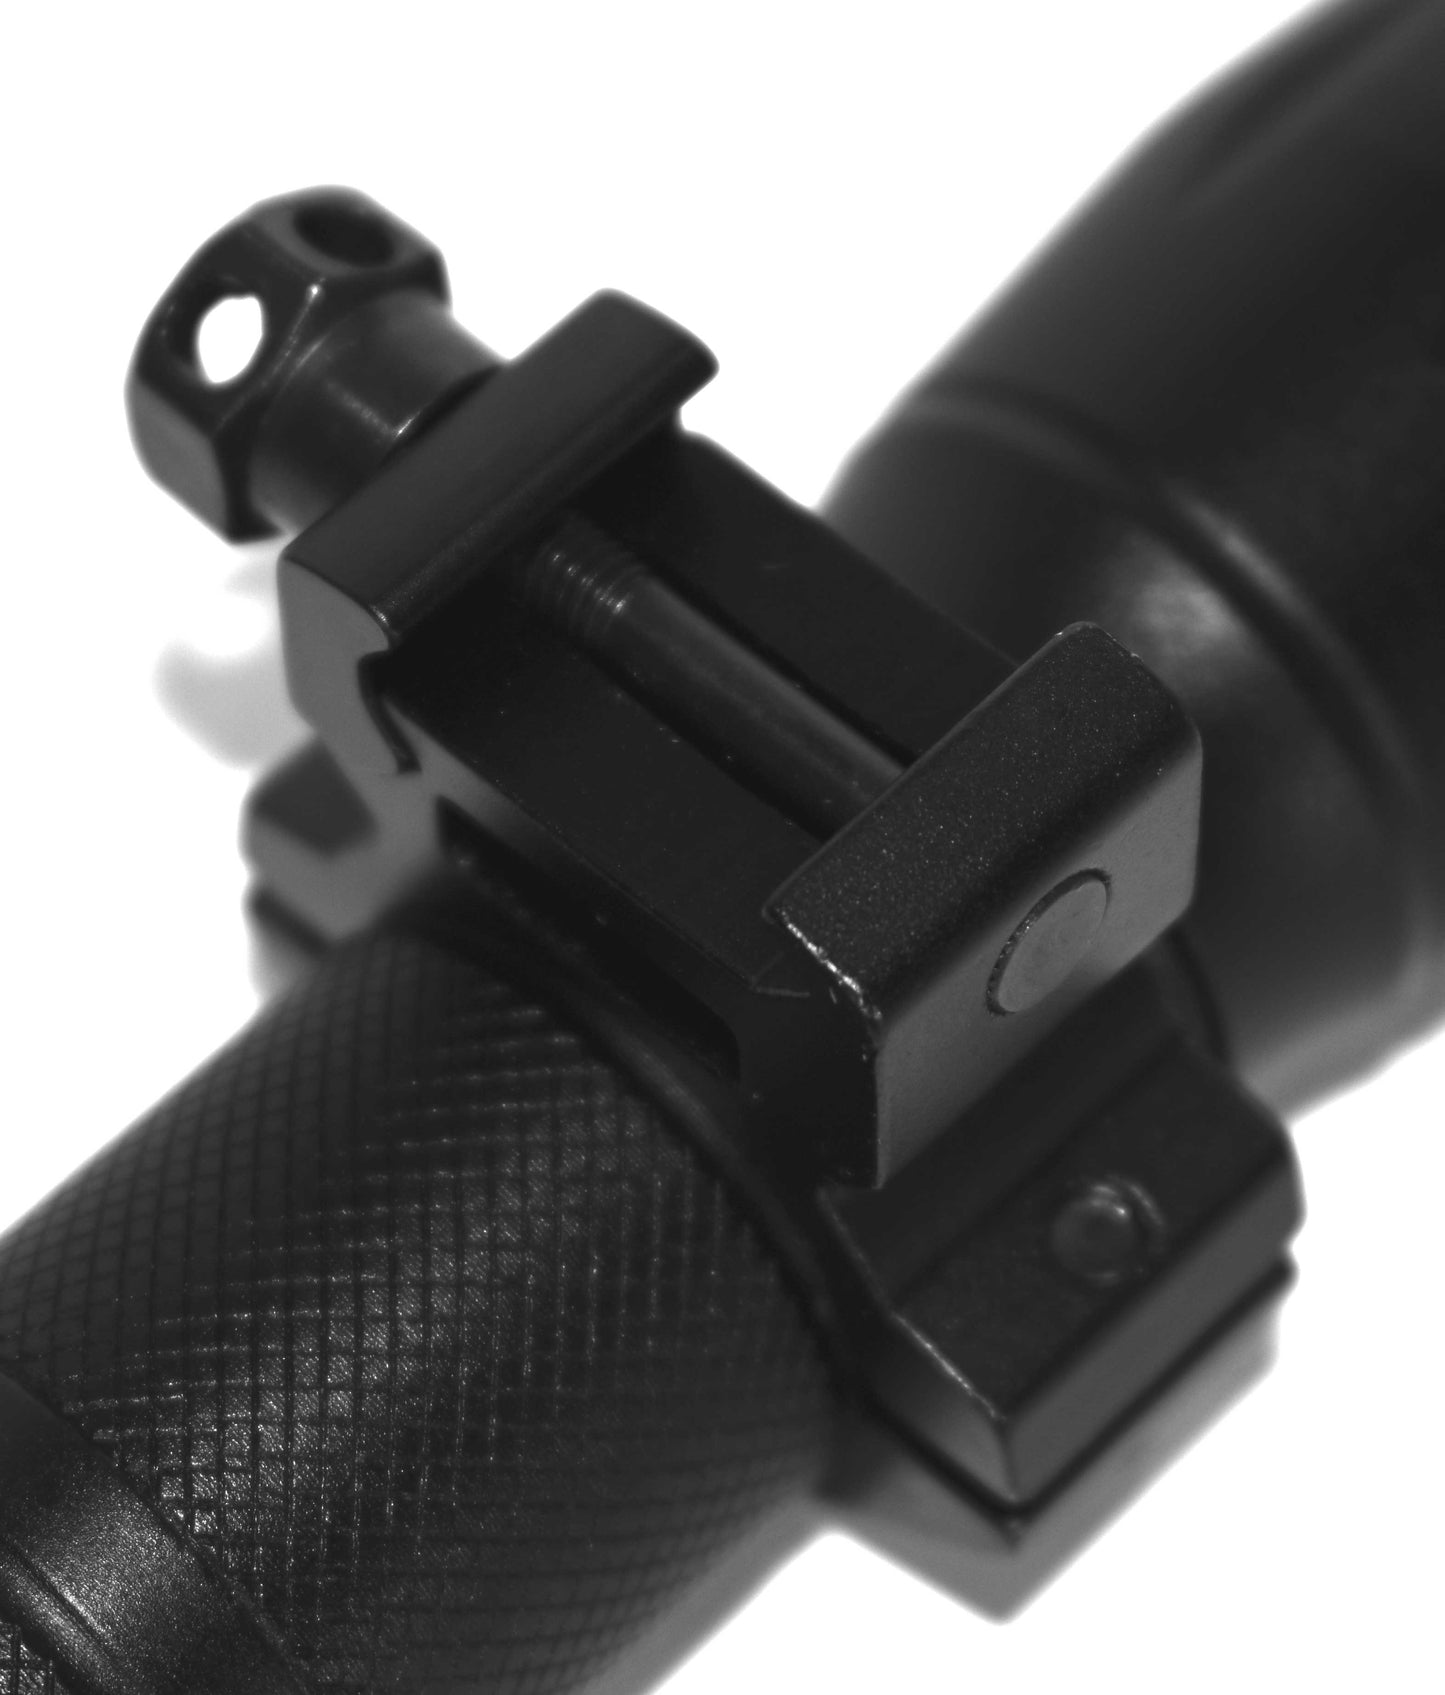 Trinity 1200 Lumen hunting Flashlight with mount compatible with Escort 22LR rifle.